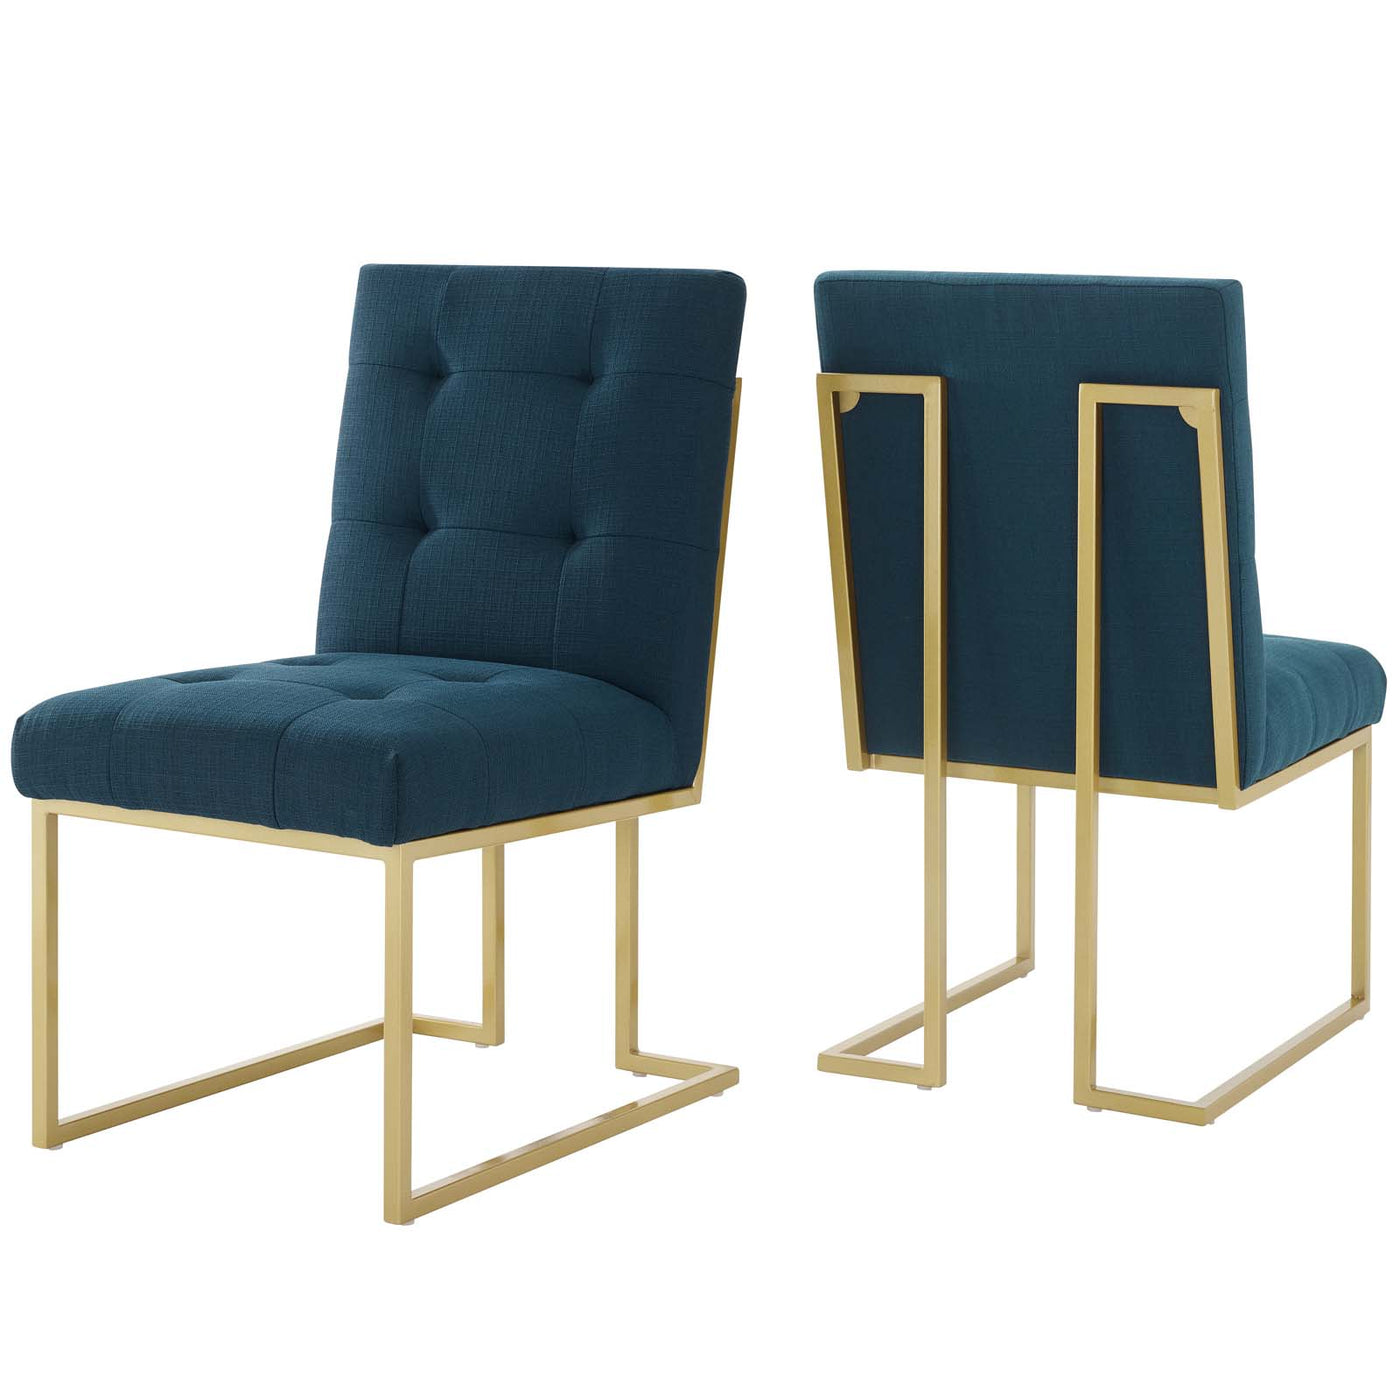 Privy Gold Stainless Steel Upholstered Fabric Dining Accent Chair Set of 2